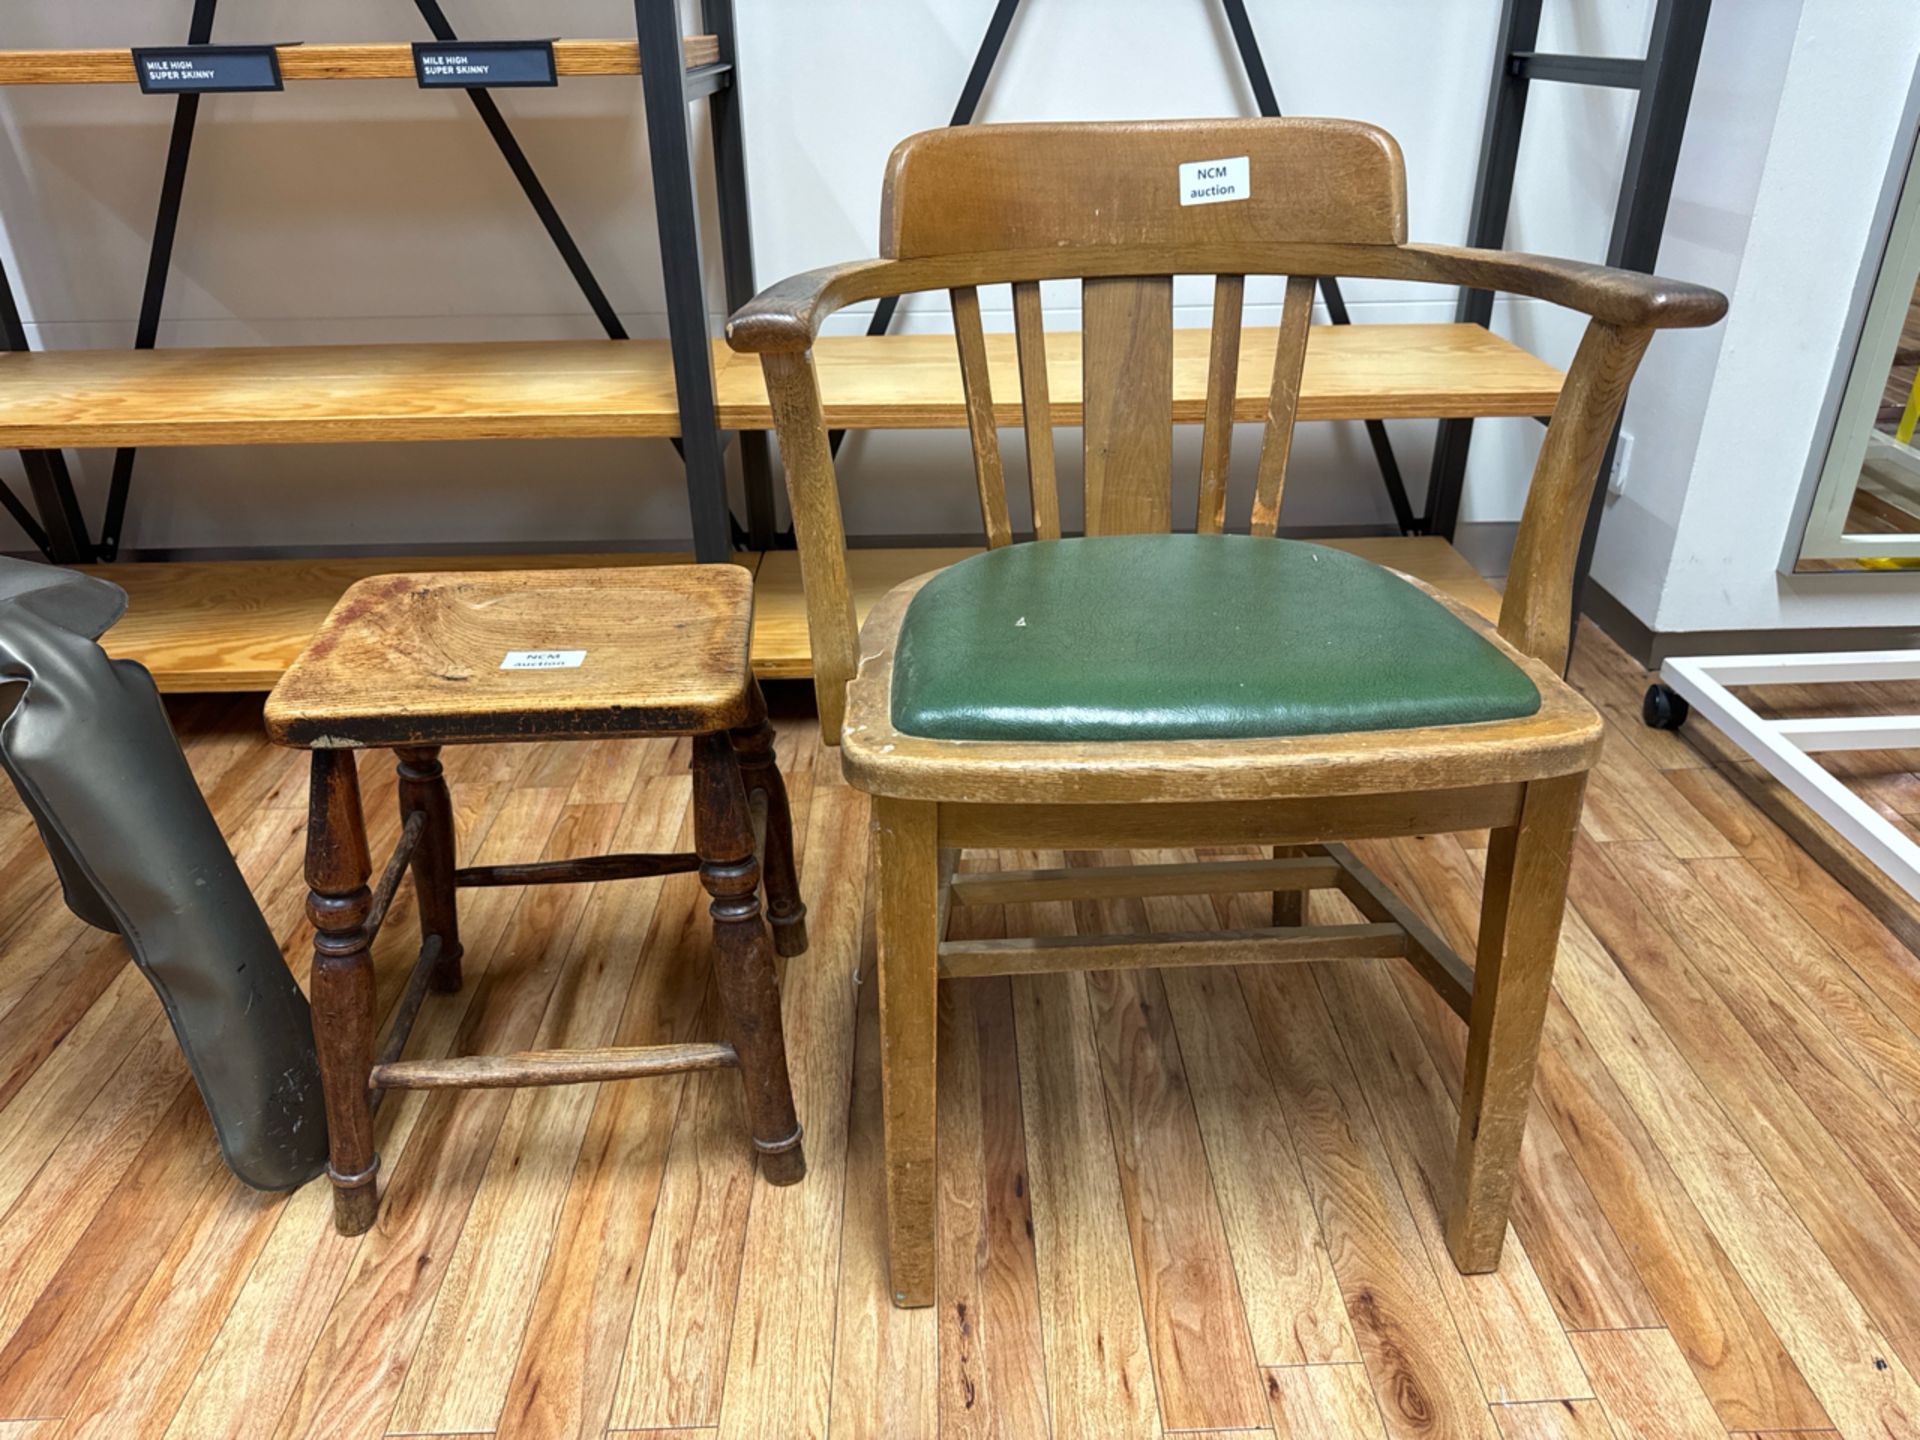 Wooden Chair & Stool Set - Image 3 of 3